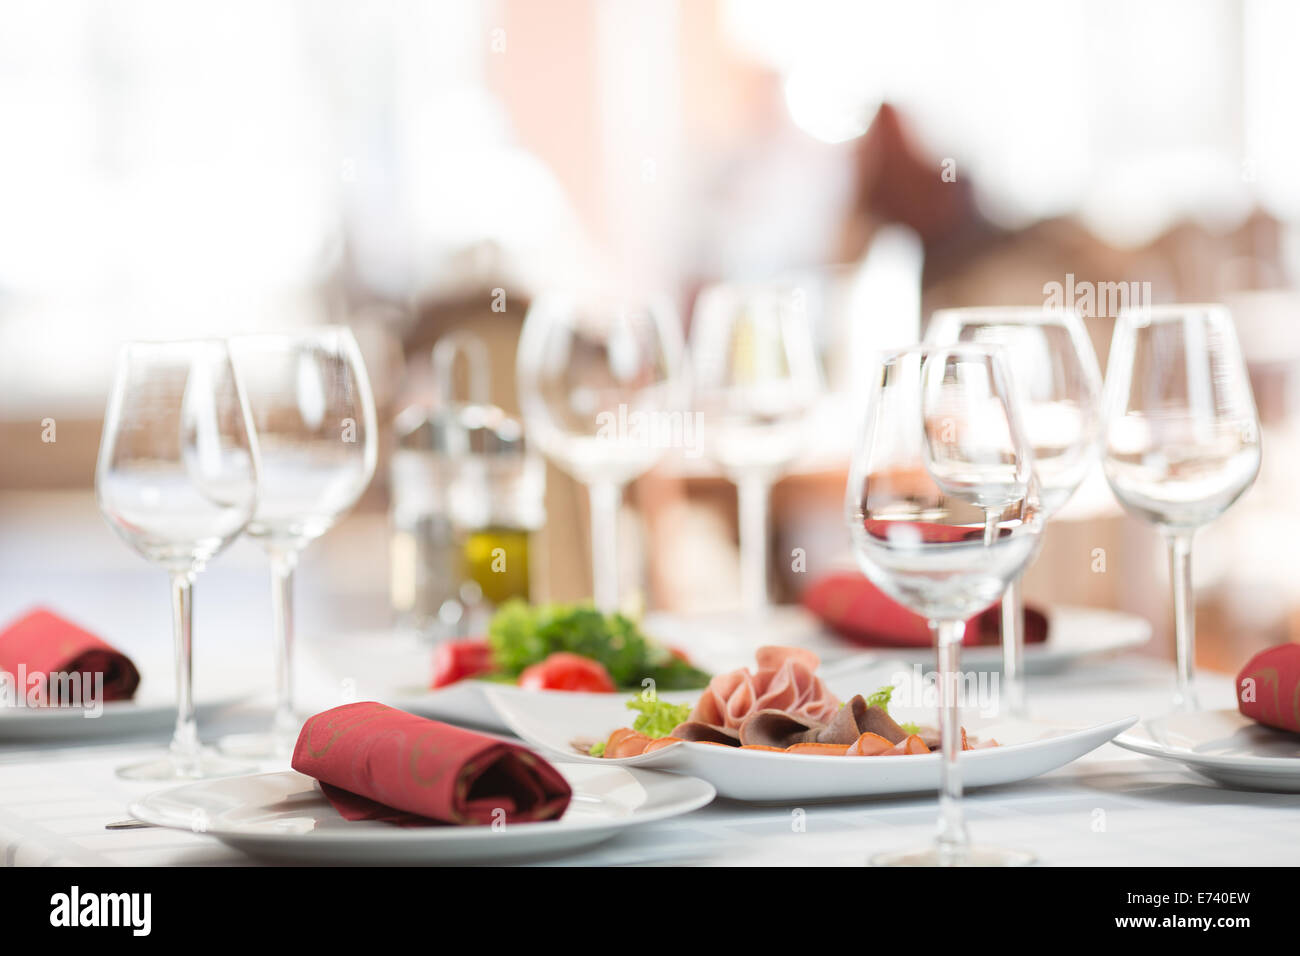 Banquet setting table in restaurant Stock Photo